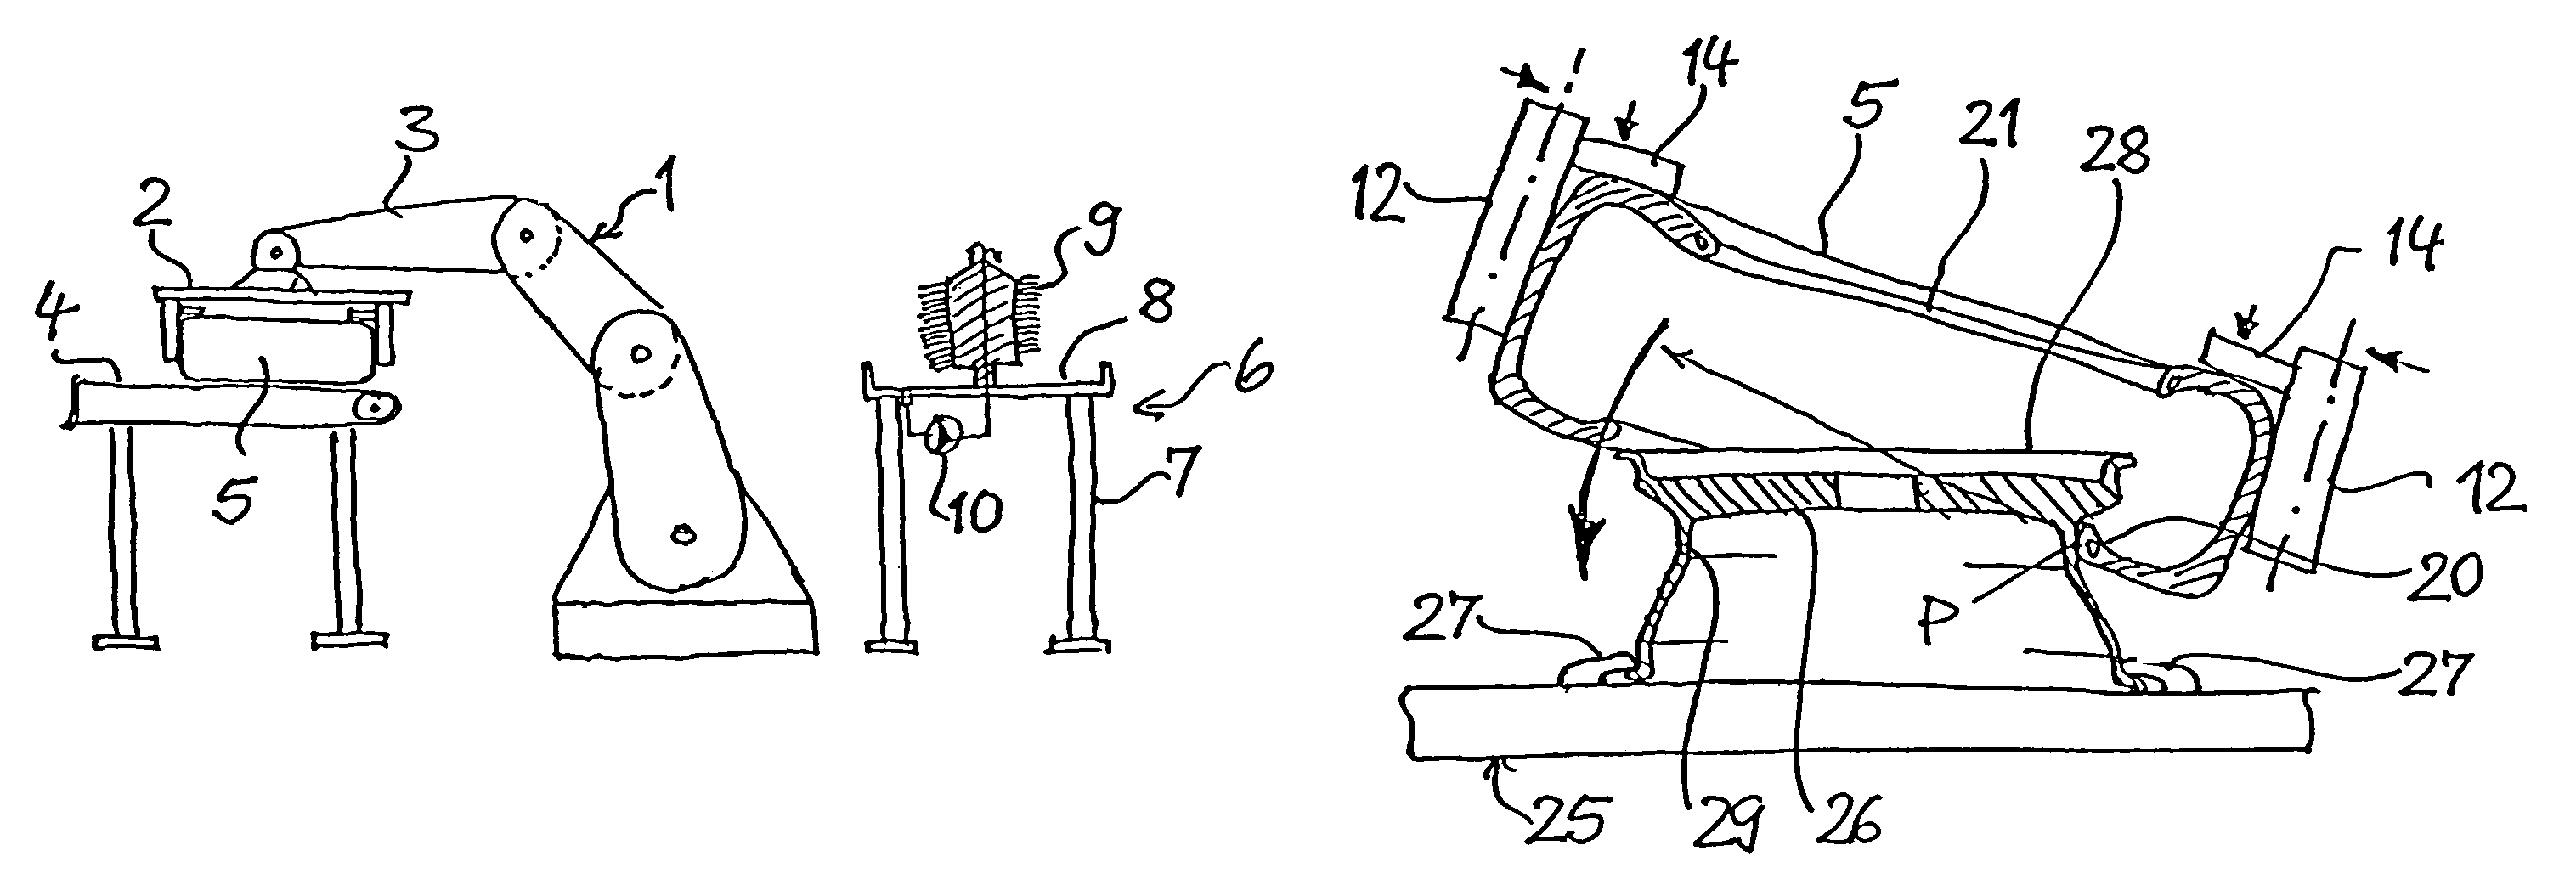 Method for mounting a pneumatic tire